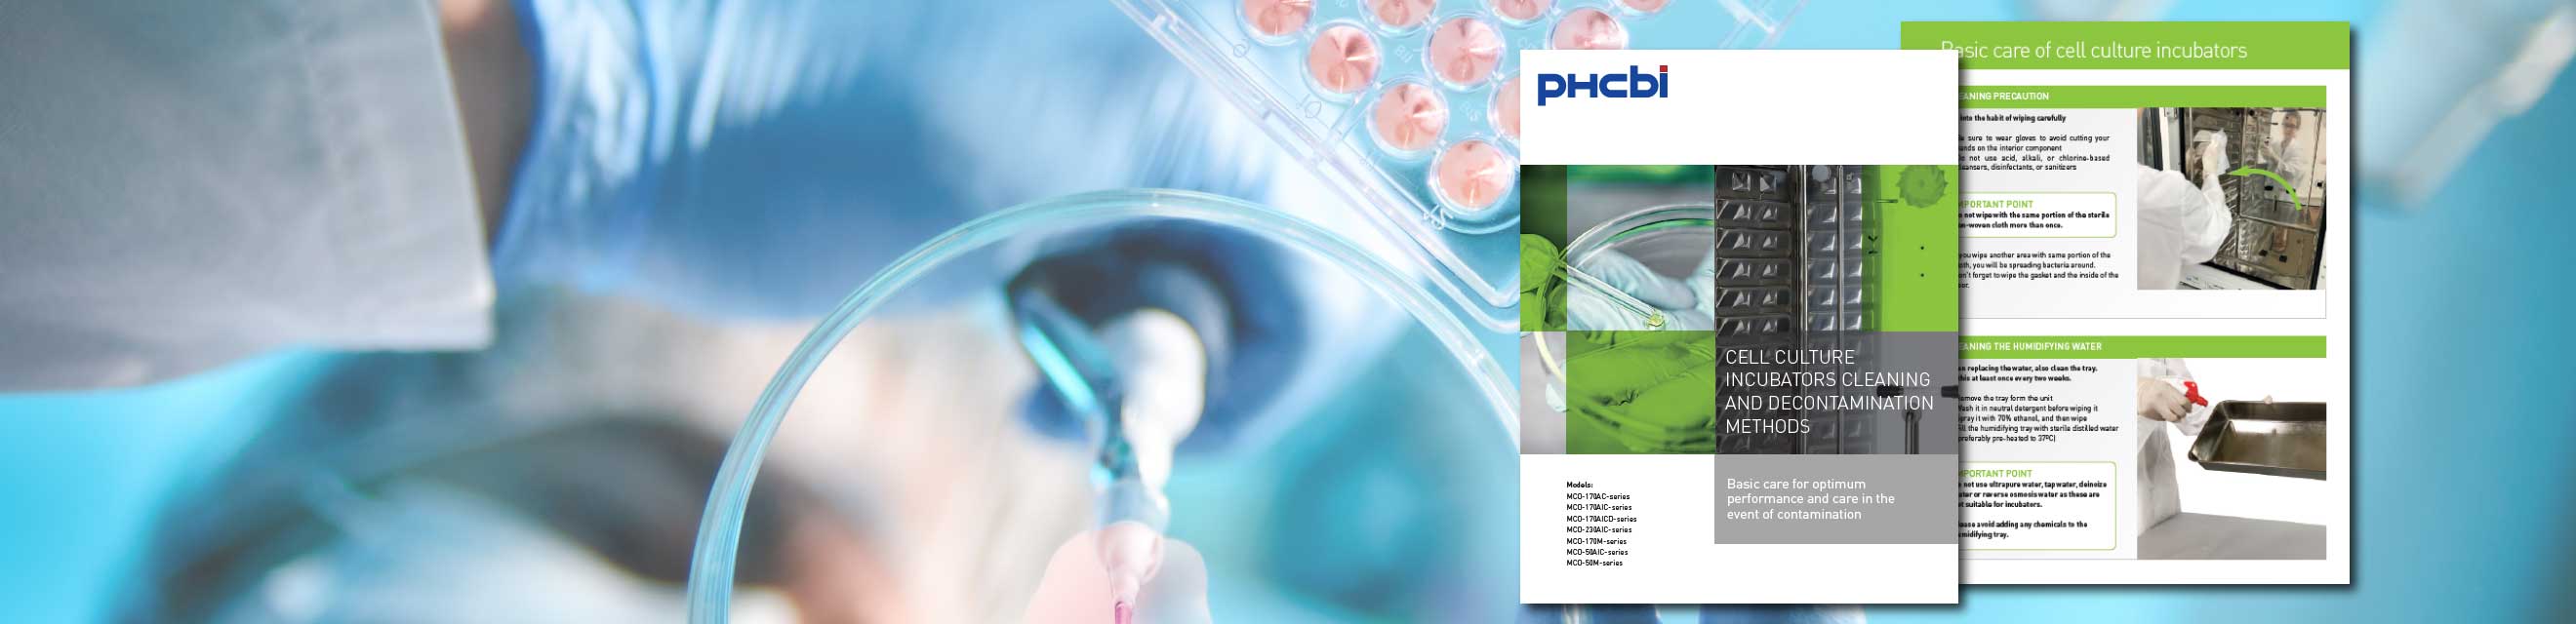 PHCbi for Partnering Life Sciences Development with Medical and Laboratory Freezers, Refrigerator, Incubators and Autoclaves